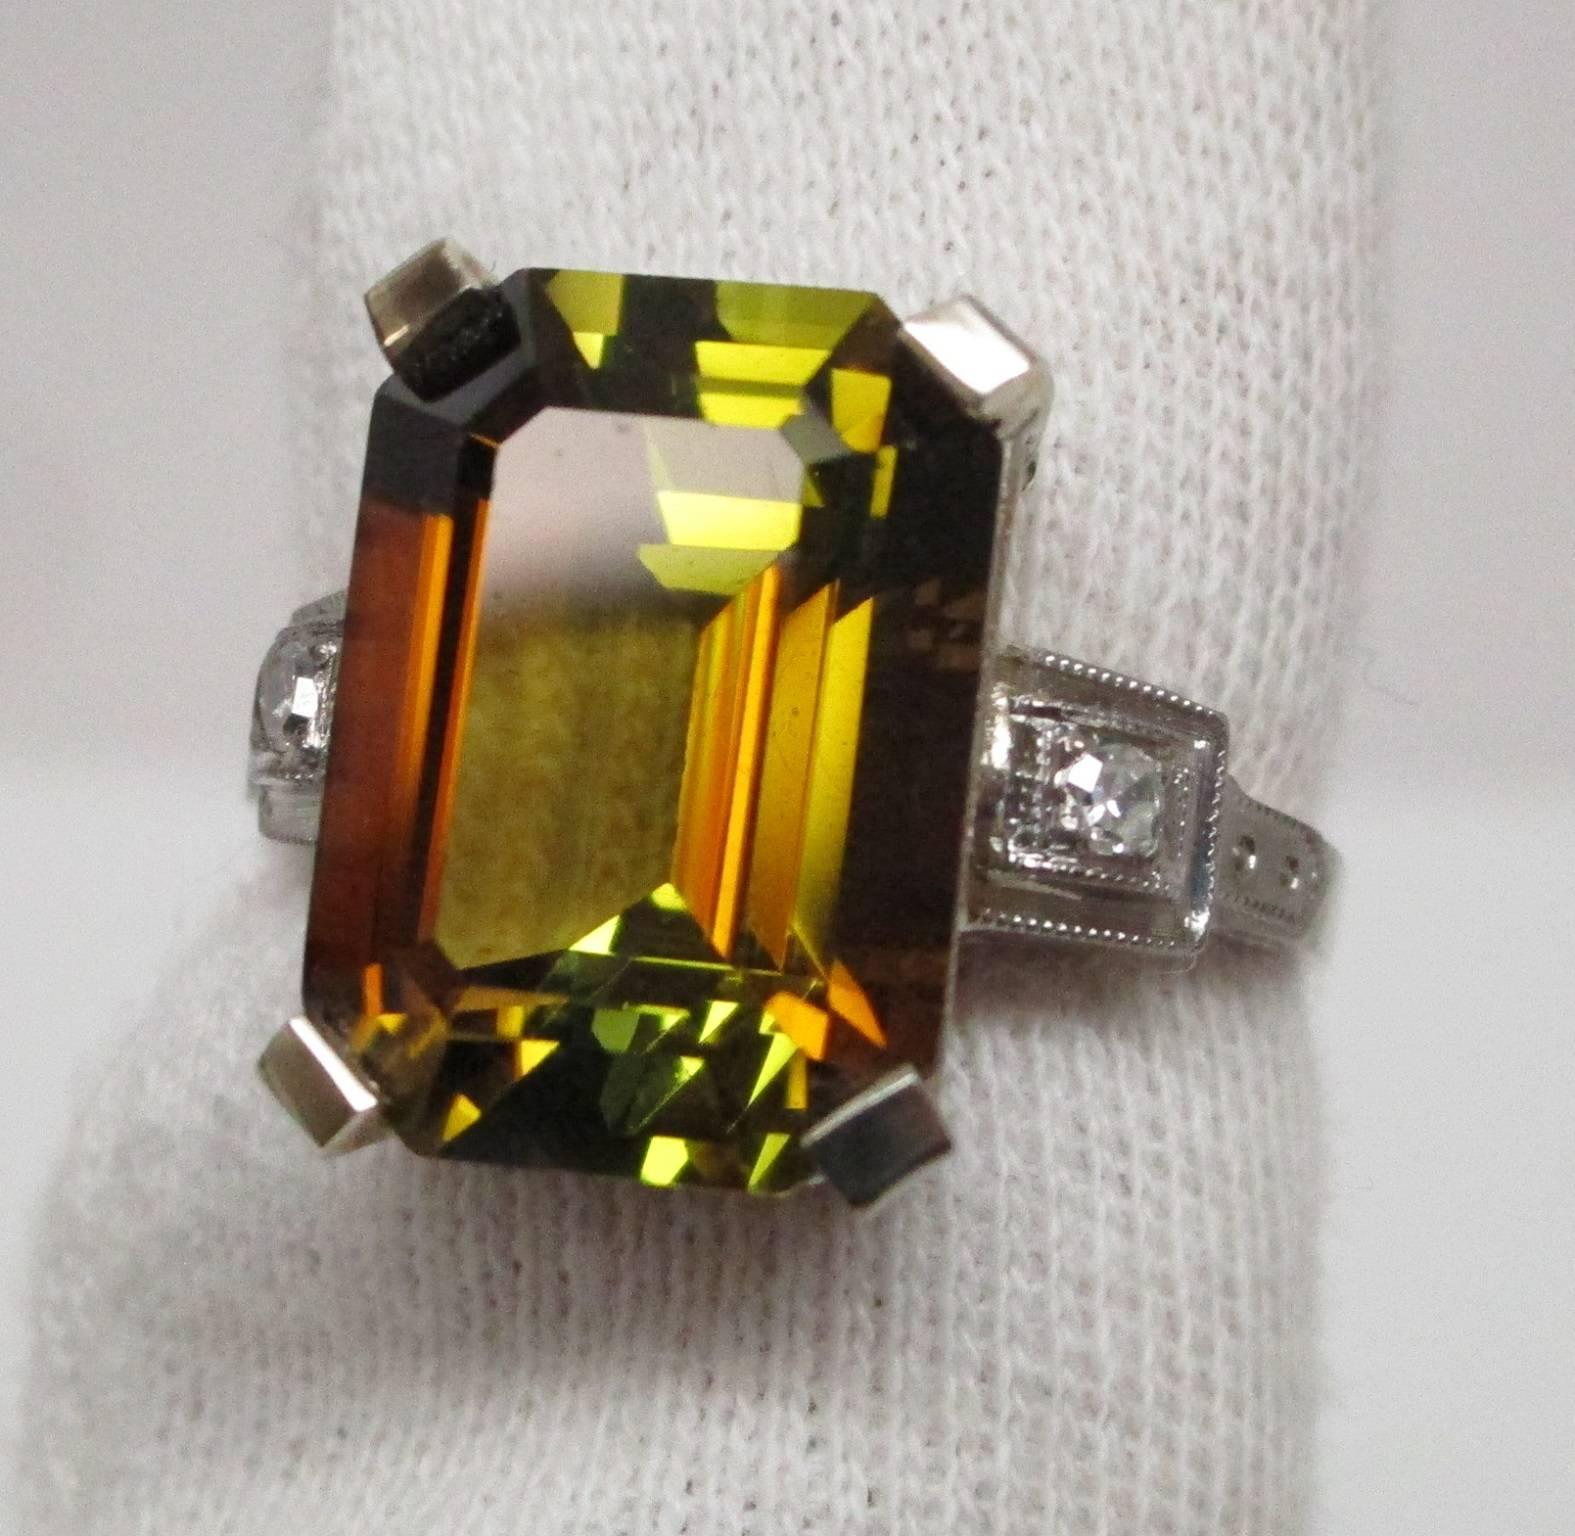 This is the most amazing ring you will ever see! The center stone is a 6.94 carat, massive, emerald cut Orange Tourmaline, an extremely rare stone indeed. It has been certified by the American Gem Lab, AGL, as a natural, untreated, as it came out of